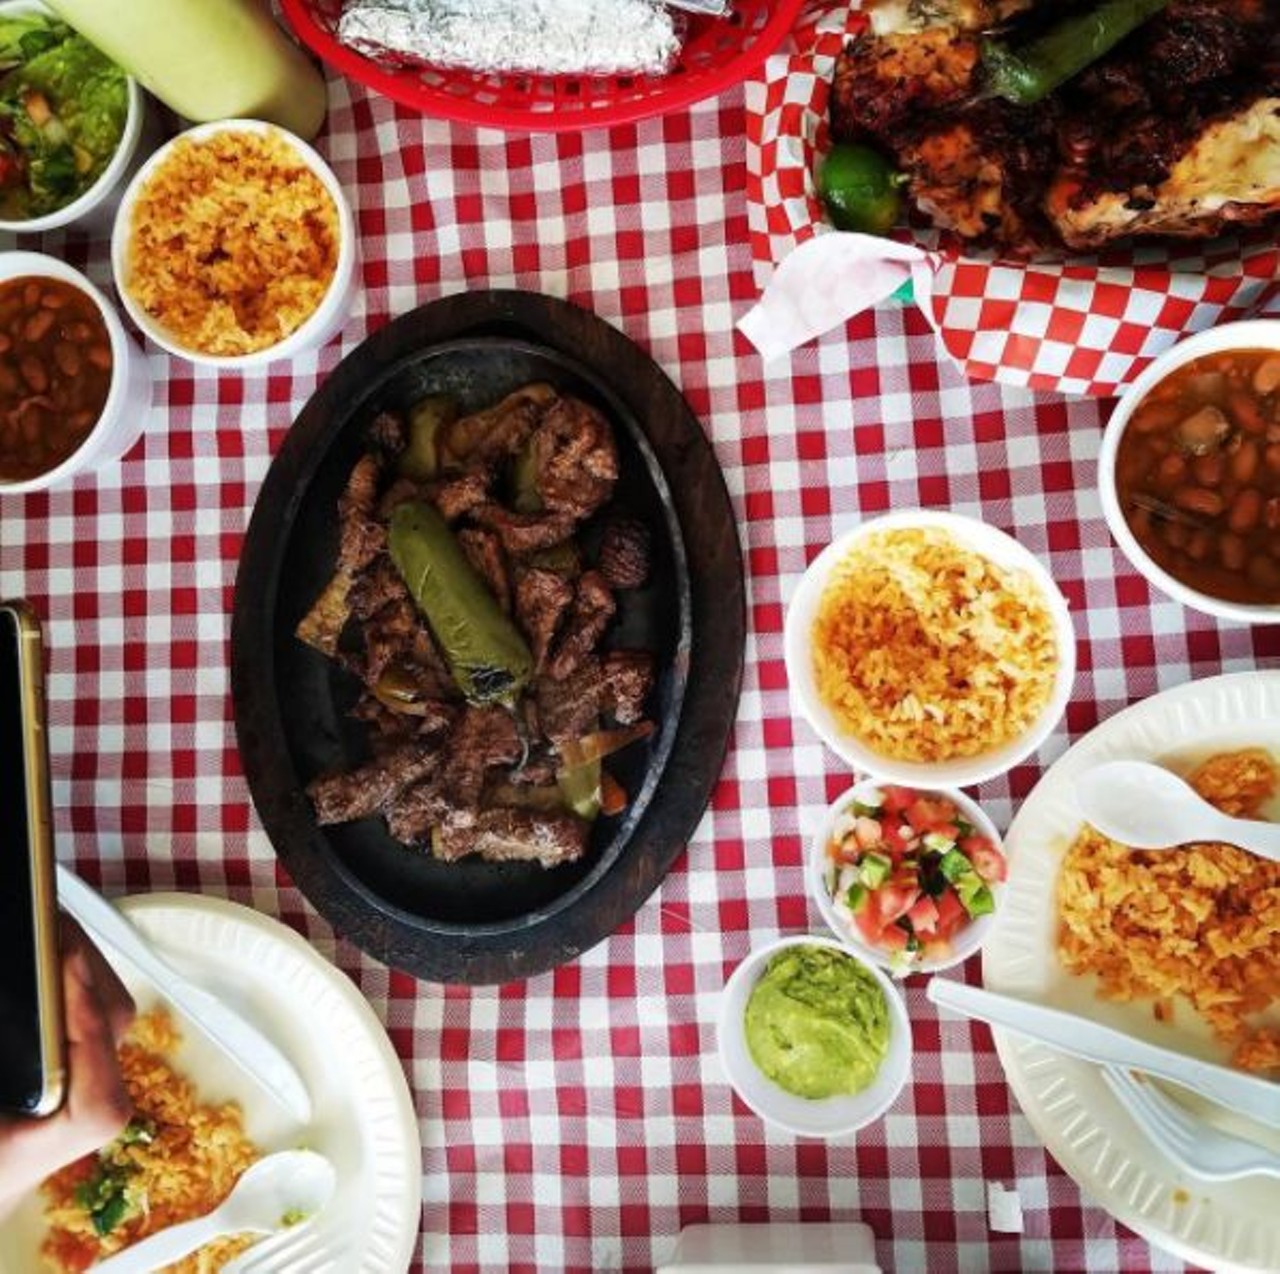 Pollos Asados Los Nortenos
4642 Rigsby Ave., (210) 648-3303
Pollos Asados could justify cult status on the basis of its pollos alone, but as it happens there are short-of-burnt offerings from an indoor grill as well. 
Photo via Instagram, tipsy.in.sa